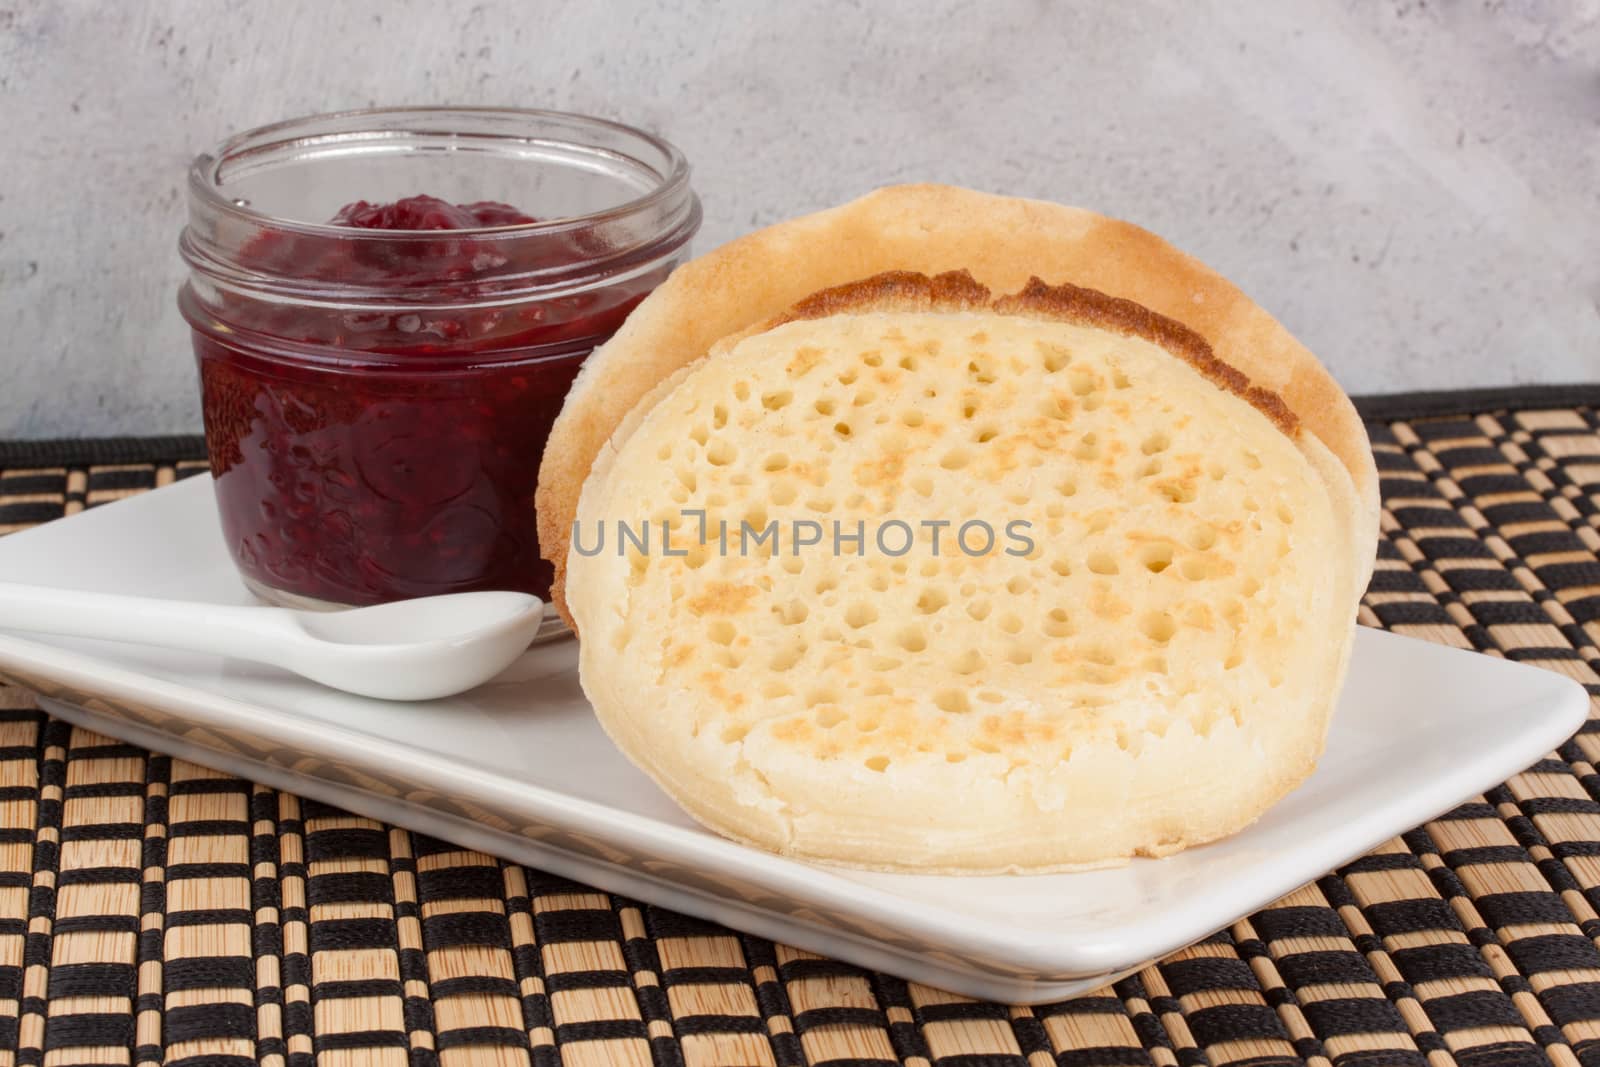 Crumpets and raspberry jam in a reusable glass jar by lanalanglois